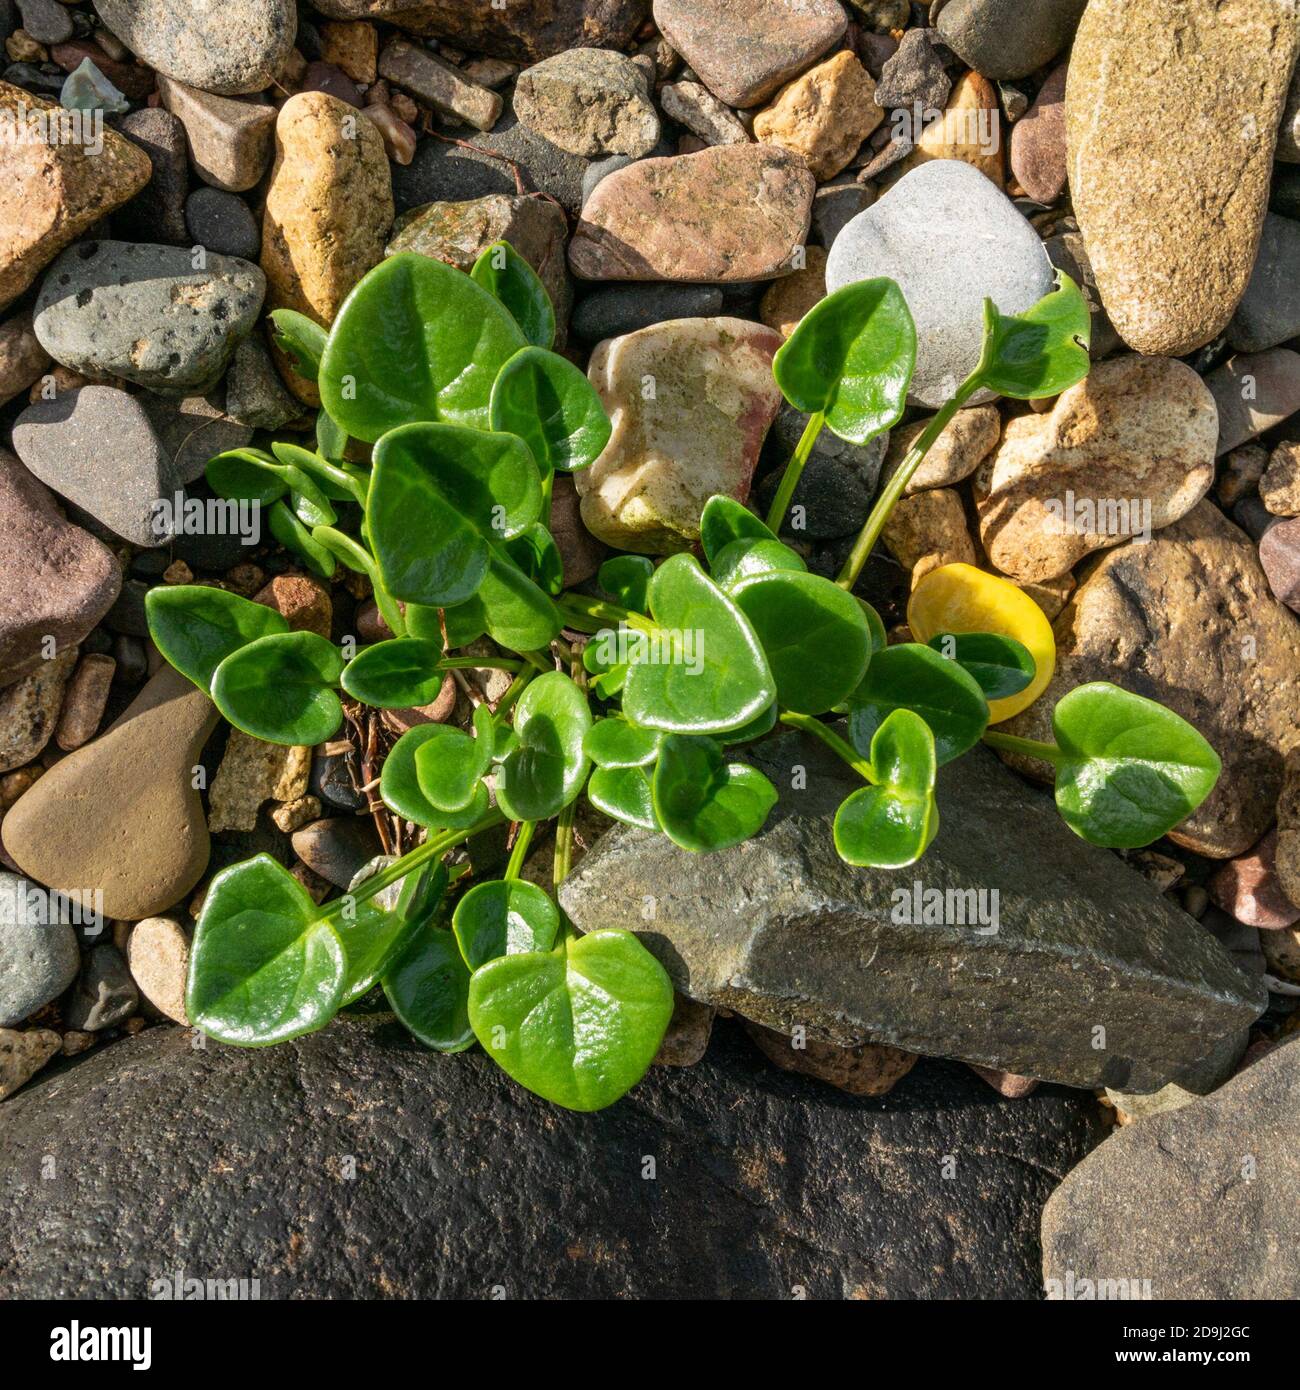 Heart shaped succulent green leaves of common scurvy grass (Cochlearia officinalis / spoonwort / scurvygrass) plant growing amongst beach pebbles. Stock Photo